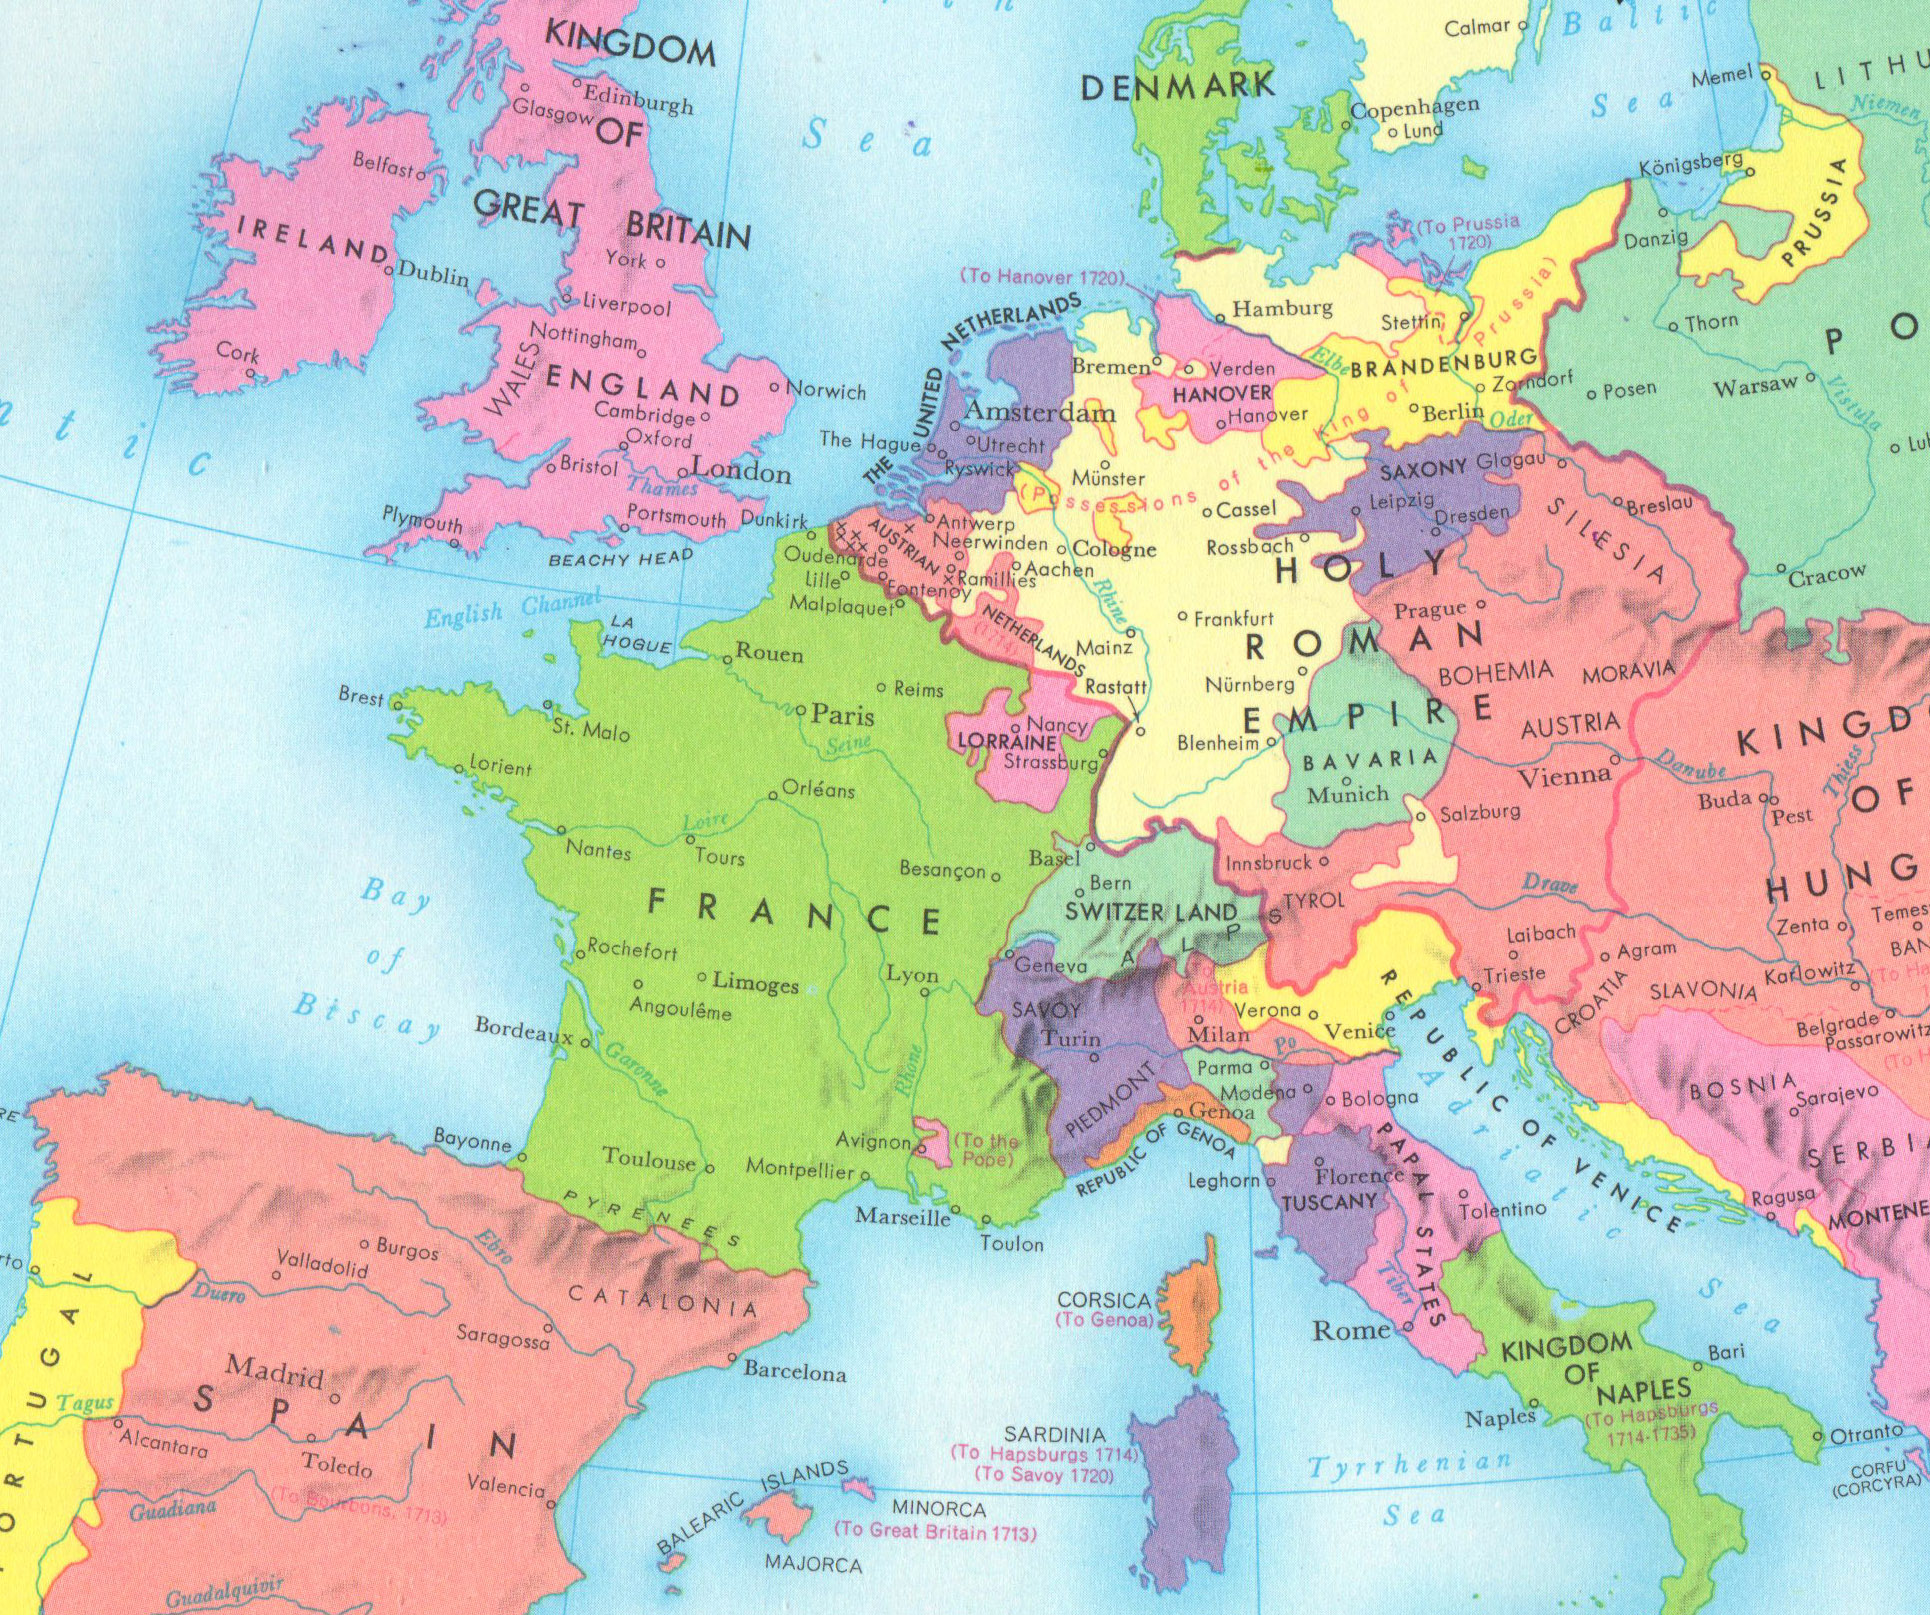 Europe in 1721